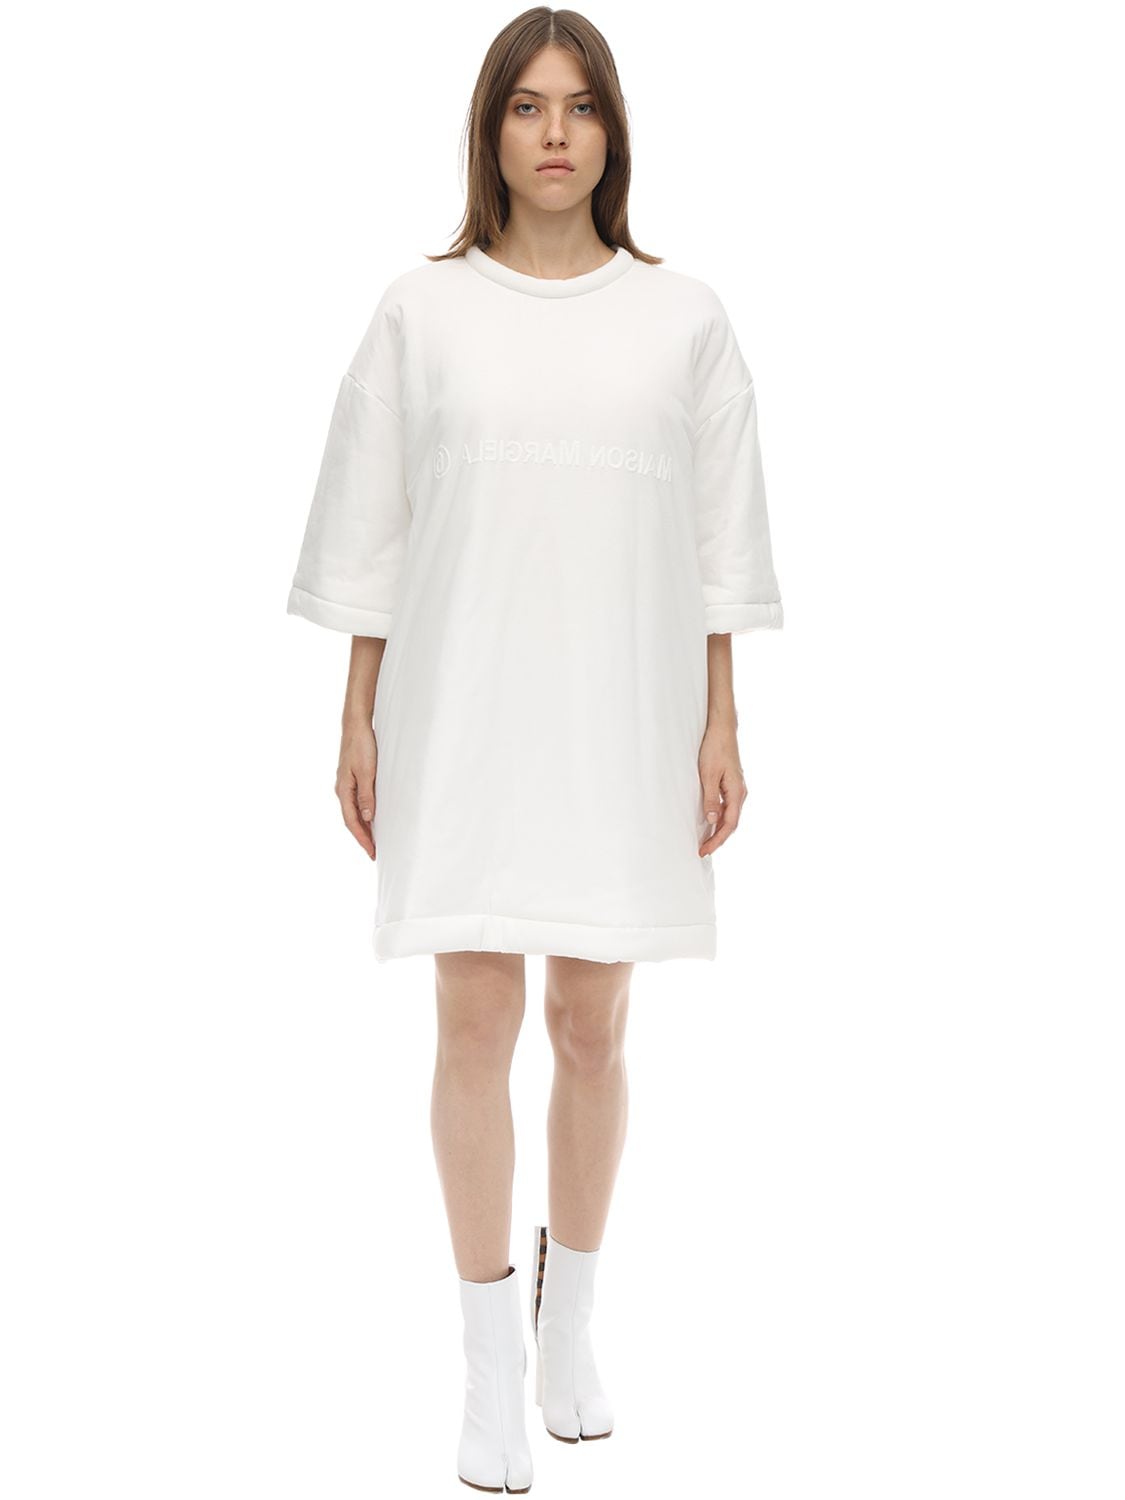 Mm6 Maison Margiela Opening Ceremony Capsule Puffy Tee Dress In White